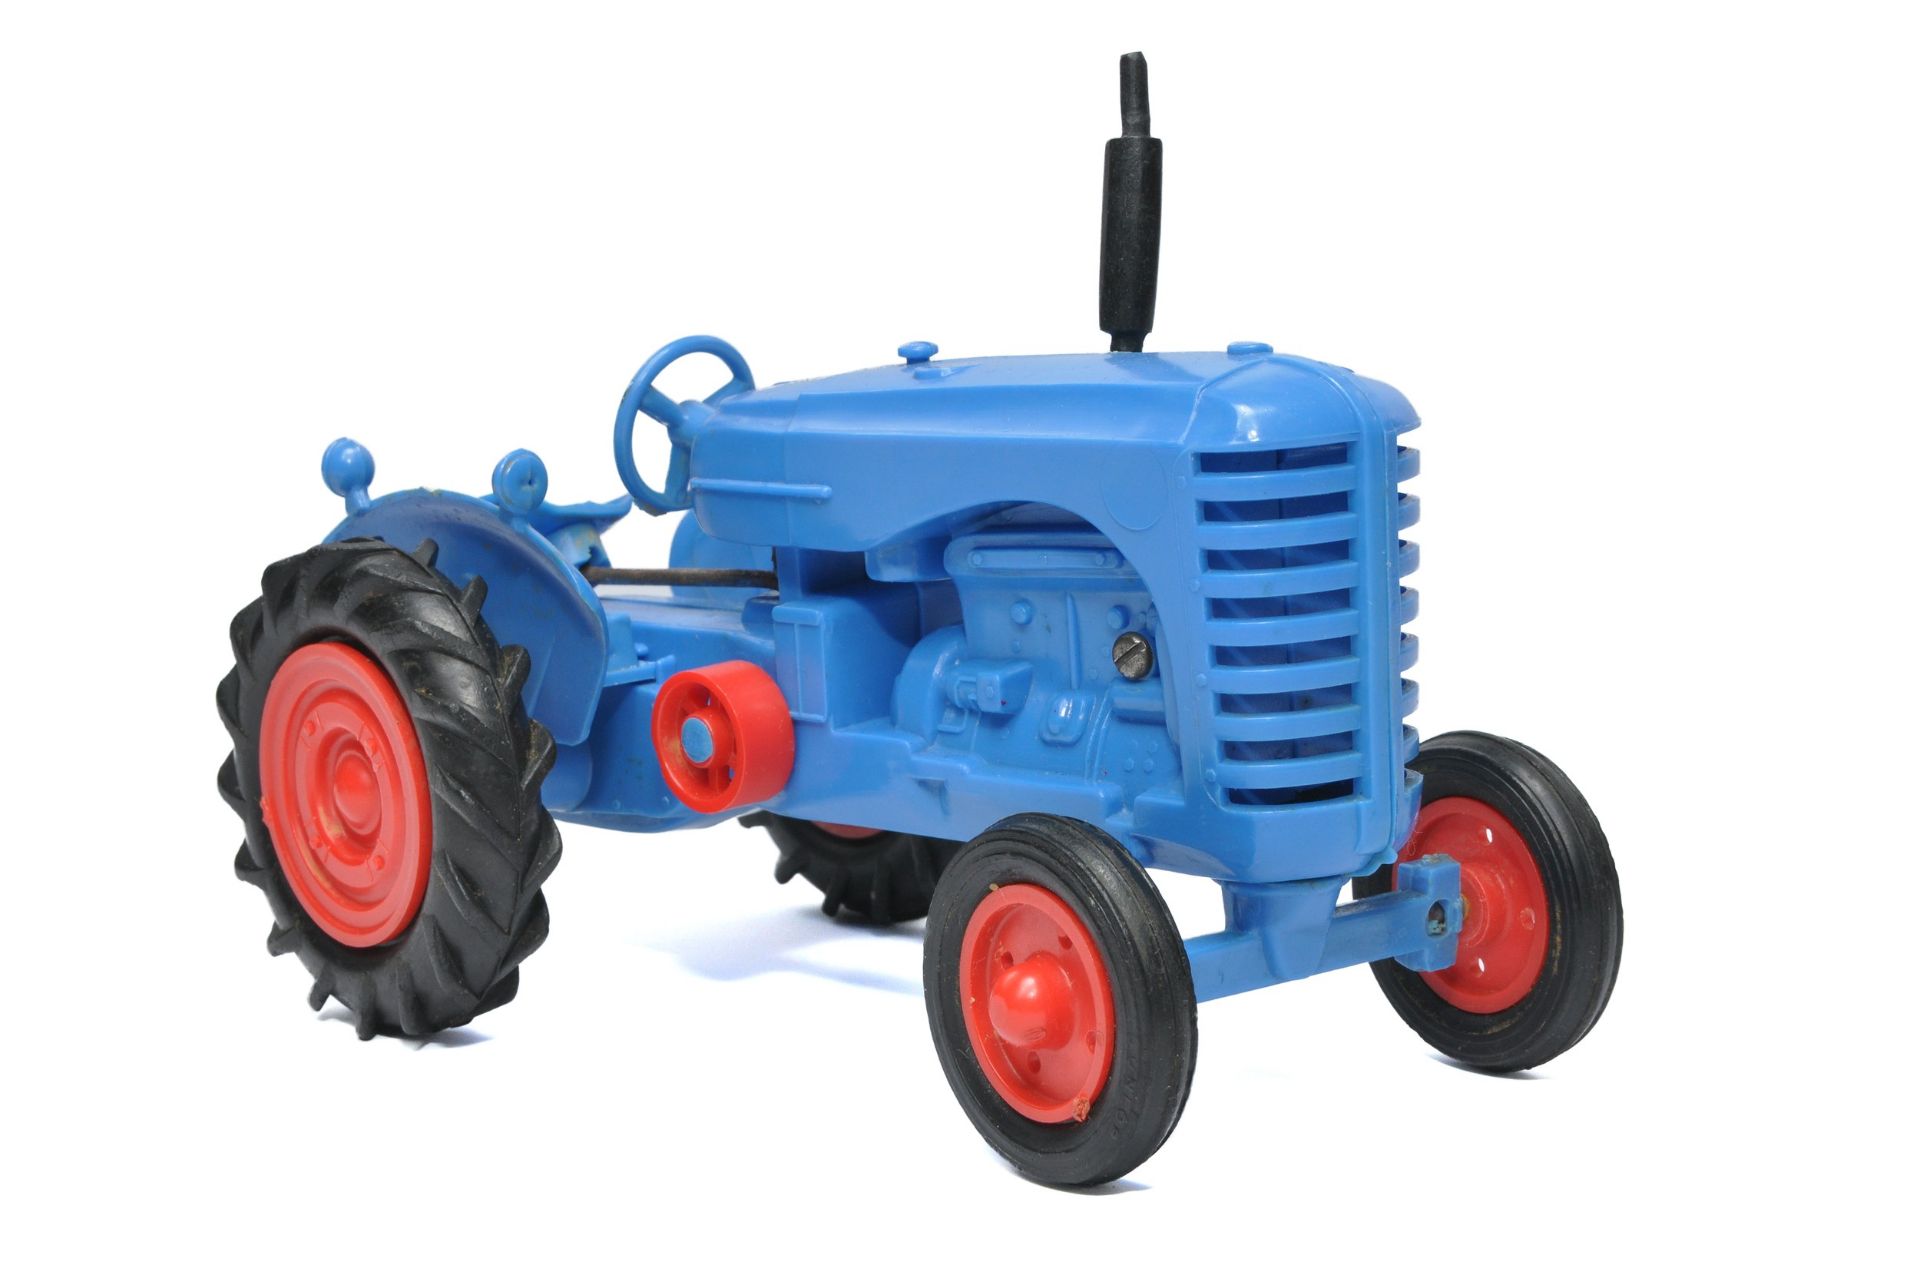 Raphael Lipkin (England) approx 1/24 plastic scale model of the Massey Harris Tractor in blue. - Image 4 of 4